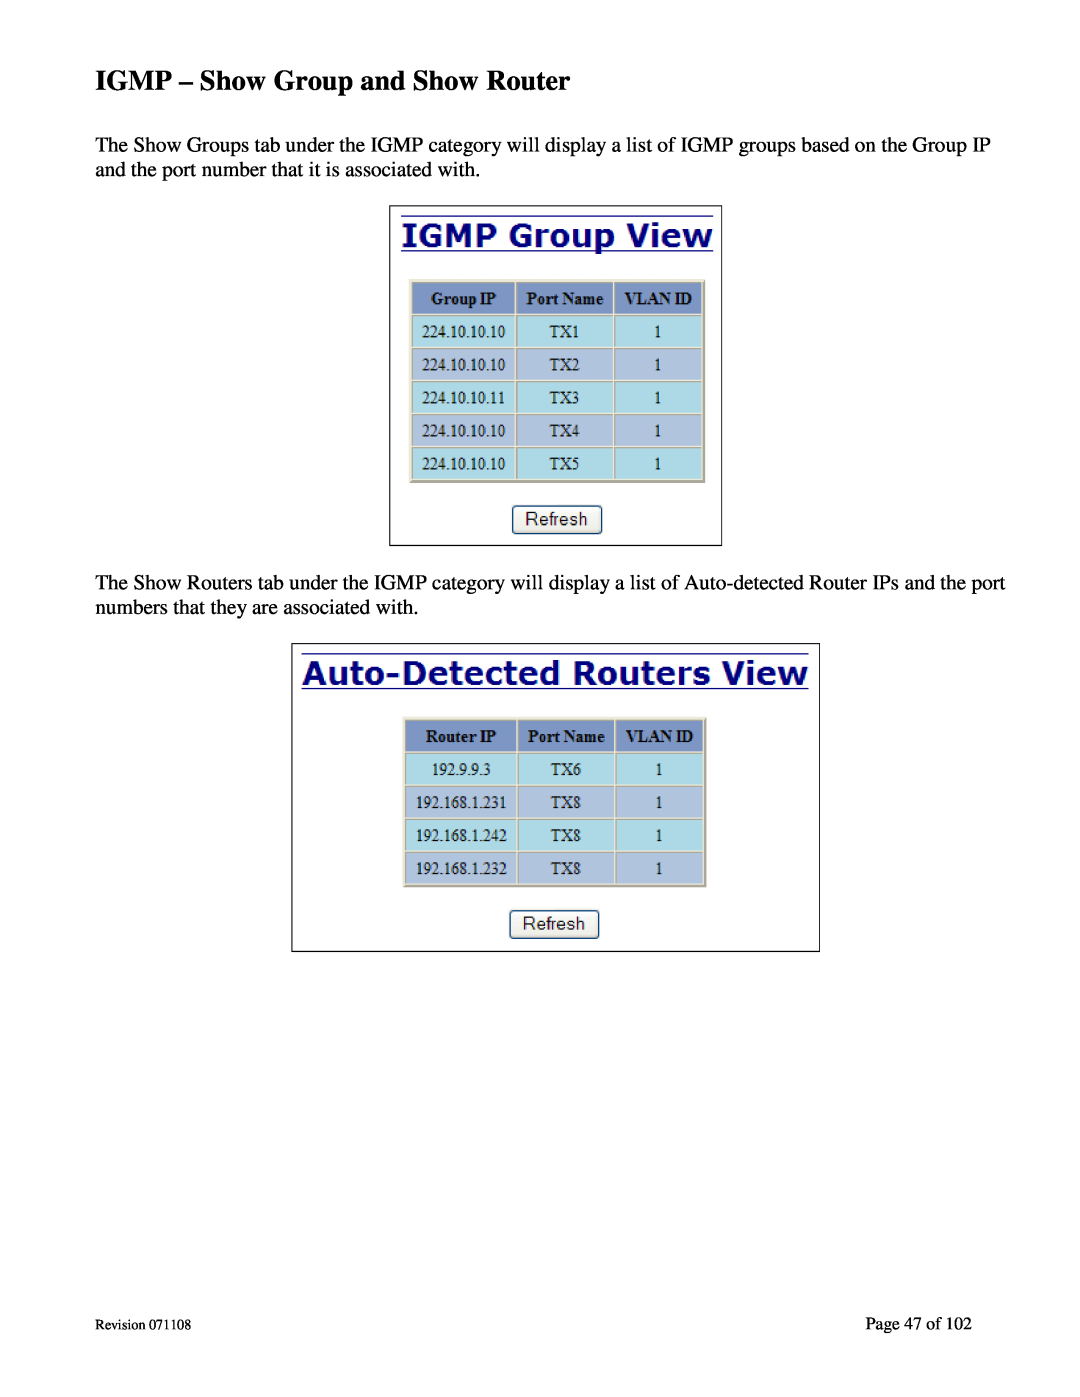 N-Tron 708M12 user manual IGMP - Show Group and Show Router, Page 47 of 